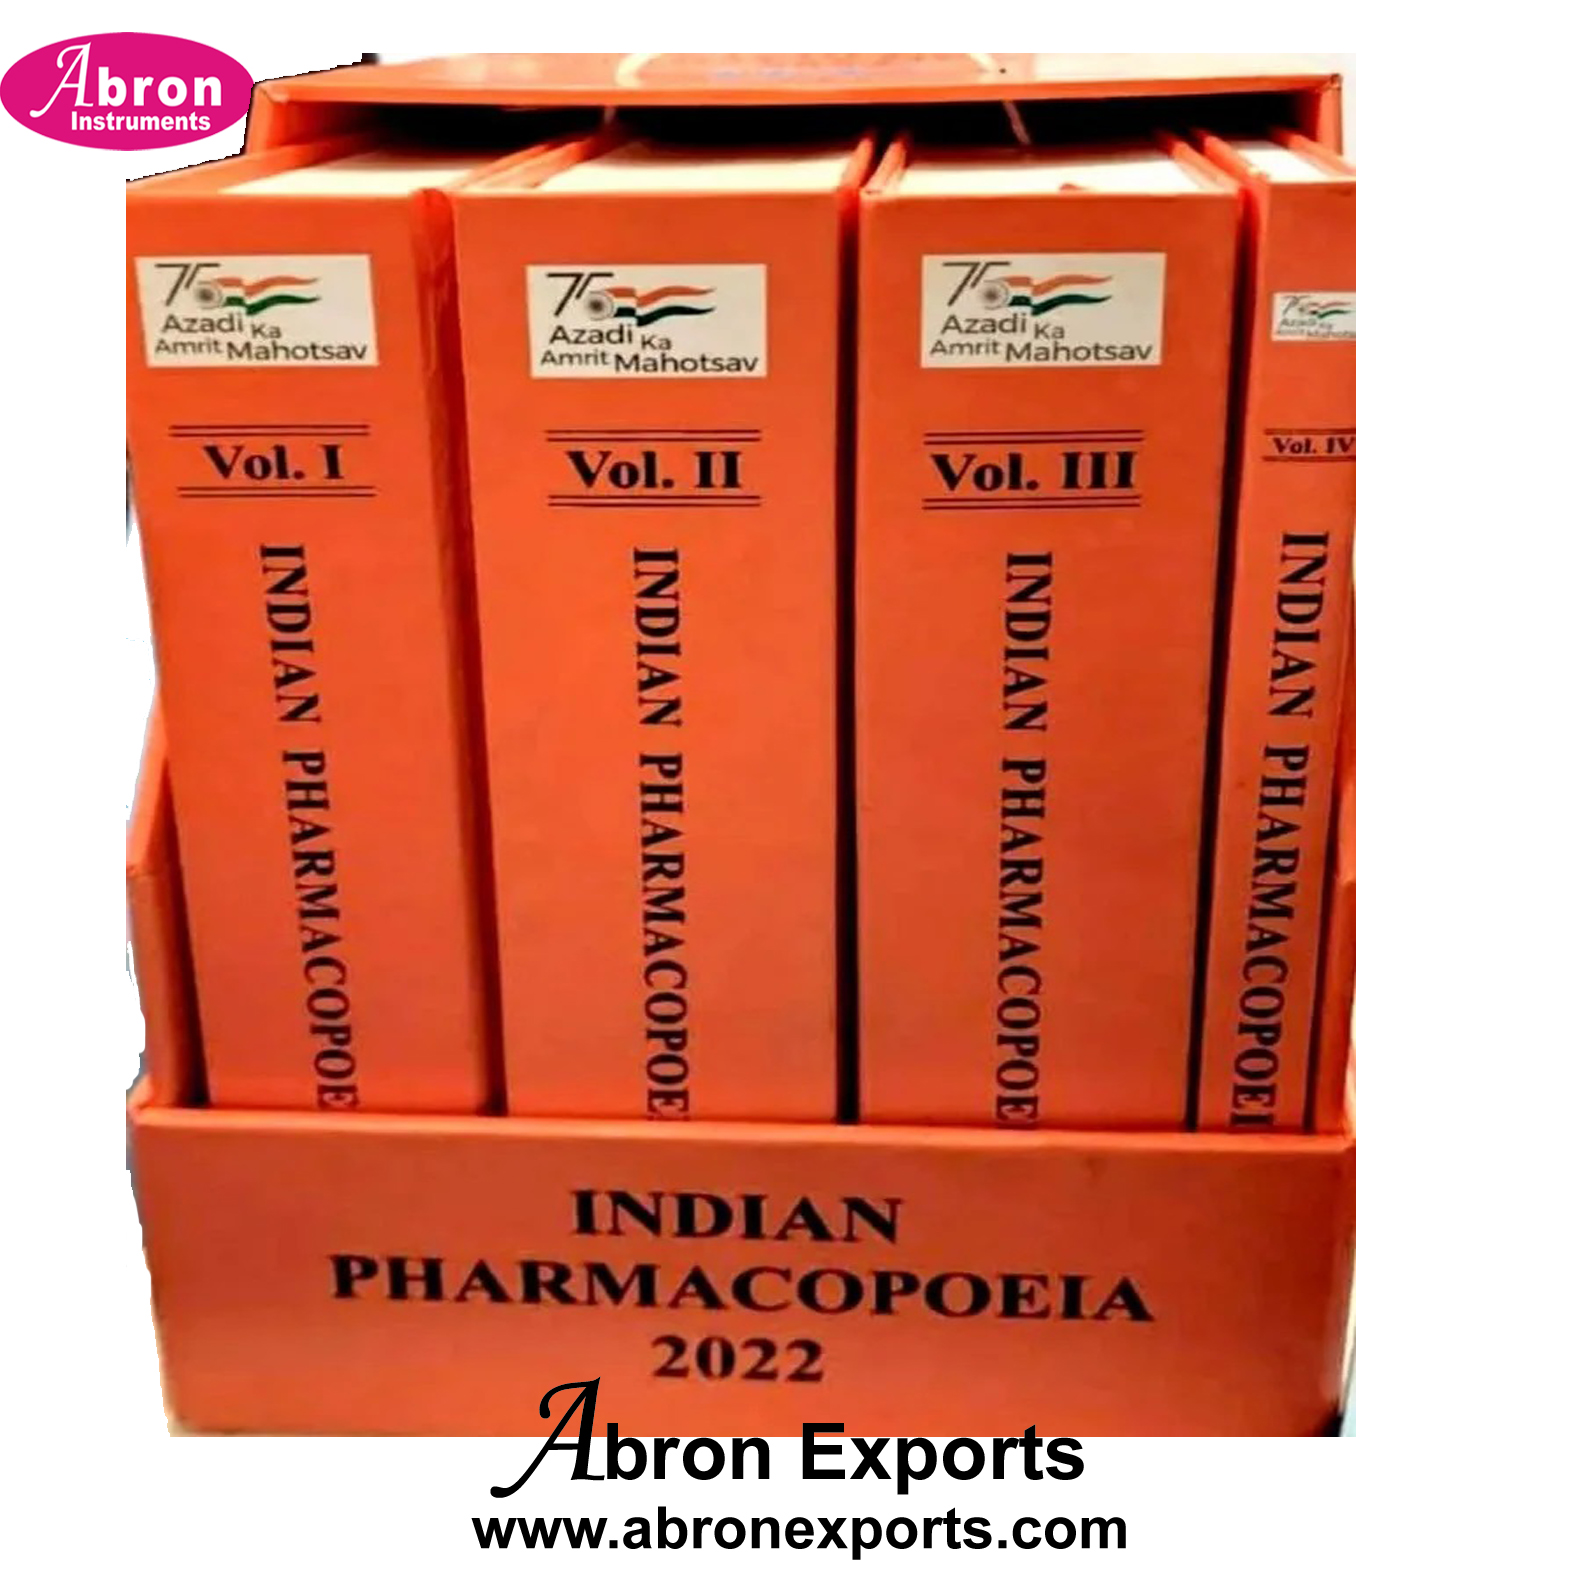 Book Indian Pharmacopoeia 2022 9th Edition 4 vols set BY Abron ABM-3679PI22 